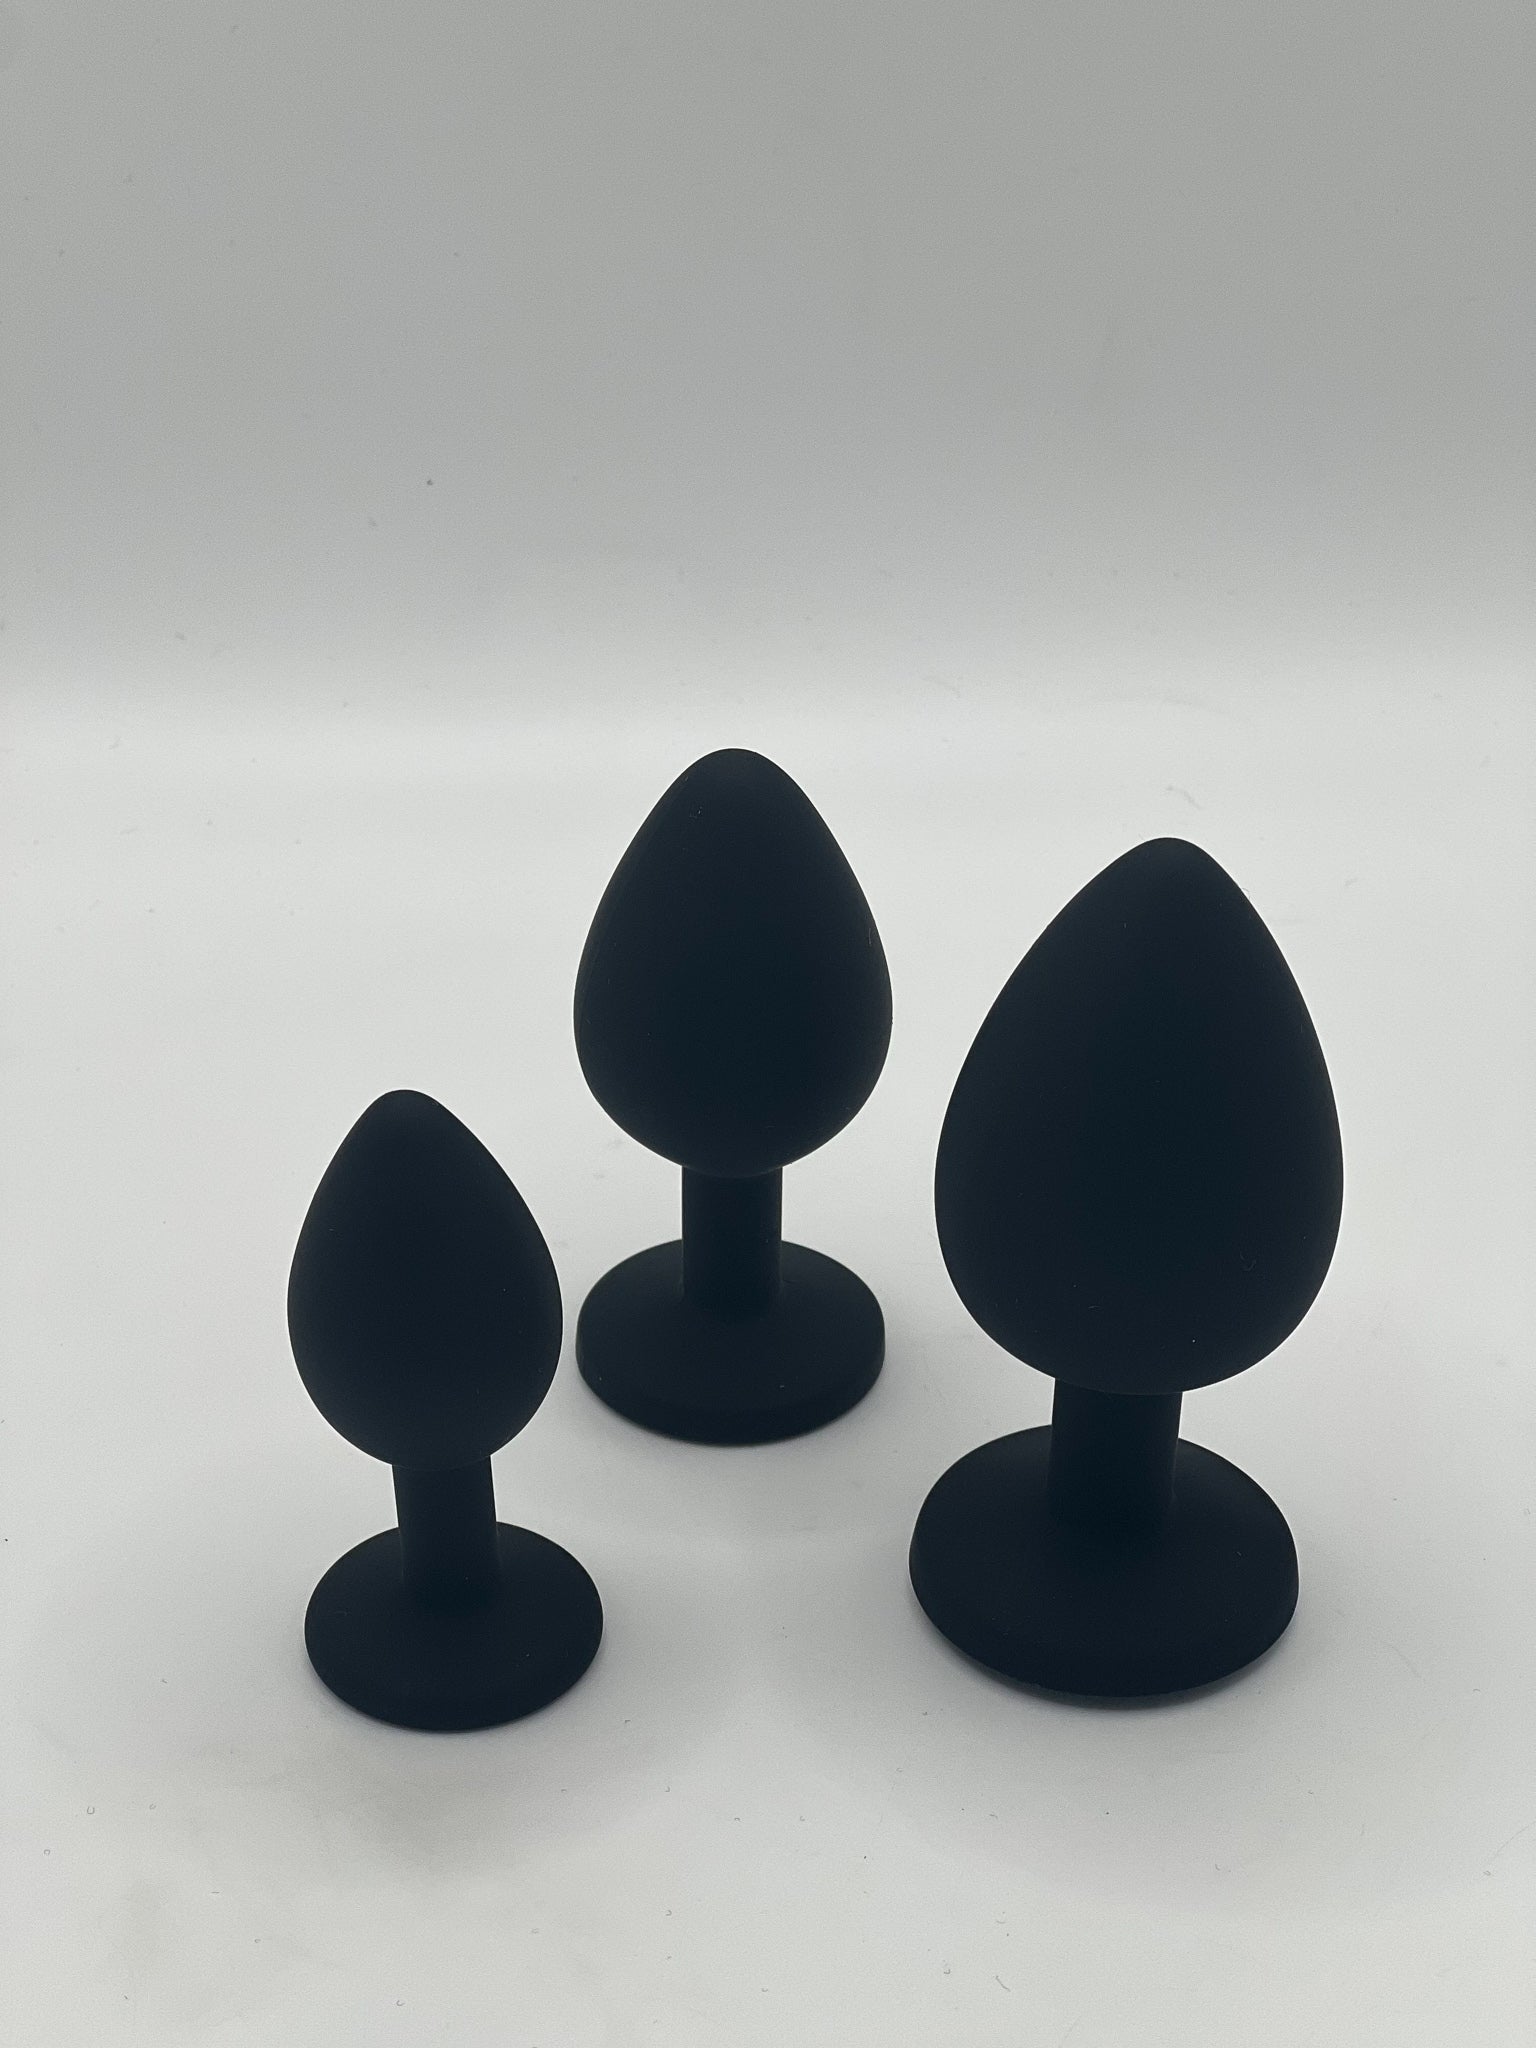 Introducing our set of 3 silicone butt plugs, designed to take your anal play to the next level. Made with high-quality, body-safe silicone, these butt plugs are soft, smooth, and easy to clean. the butt plugs come in 3 different sizes. Product specifics -   Small plug - 7cm length // 9cm diameter   Medium plug 8cm length // 11cm diameter   Large Plug 9cm length // 13cm diameter   Material Medical grade flexible silicone. 